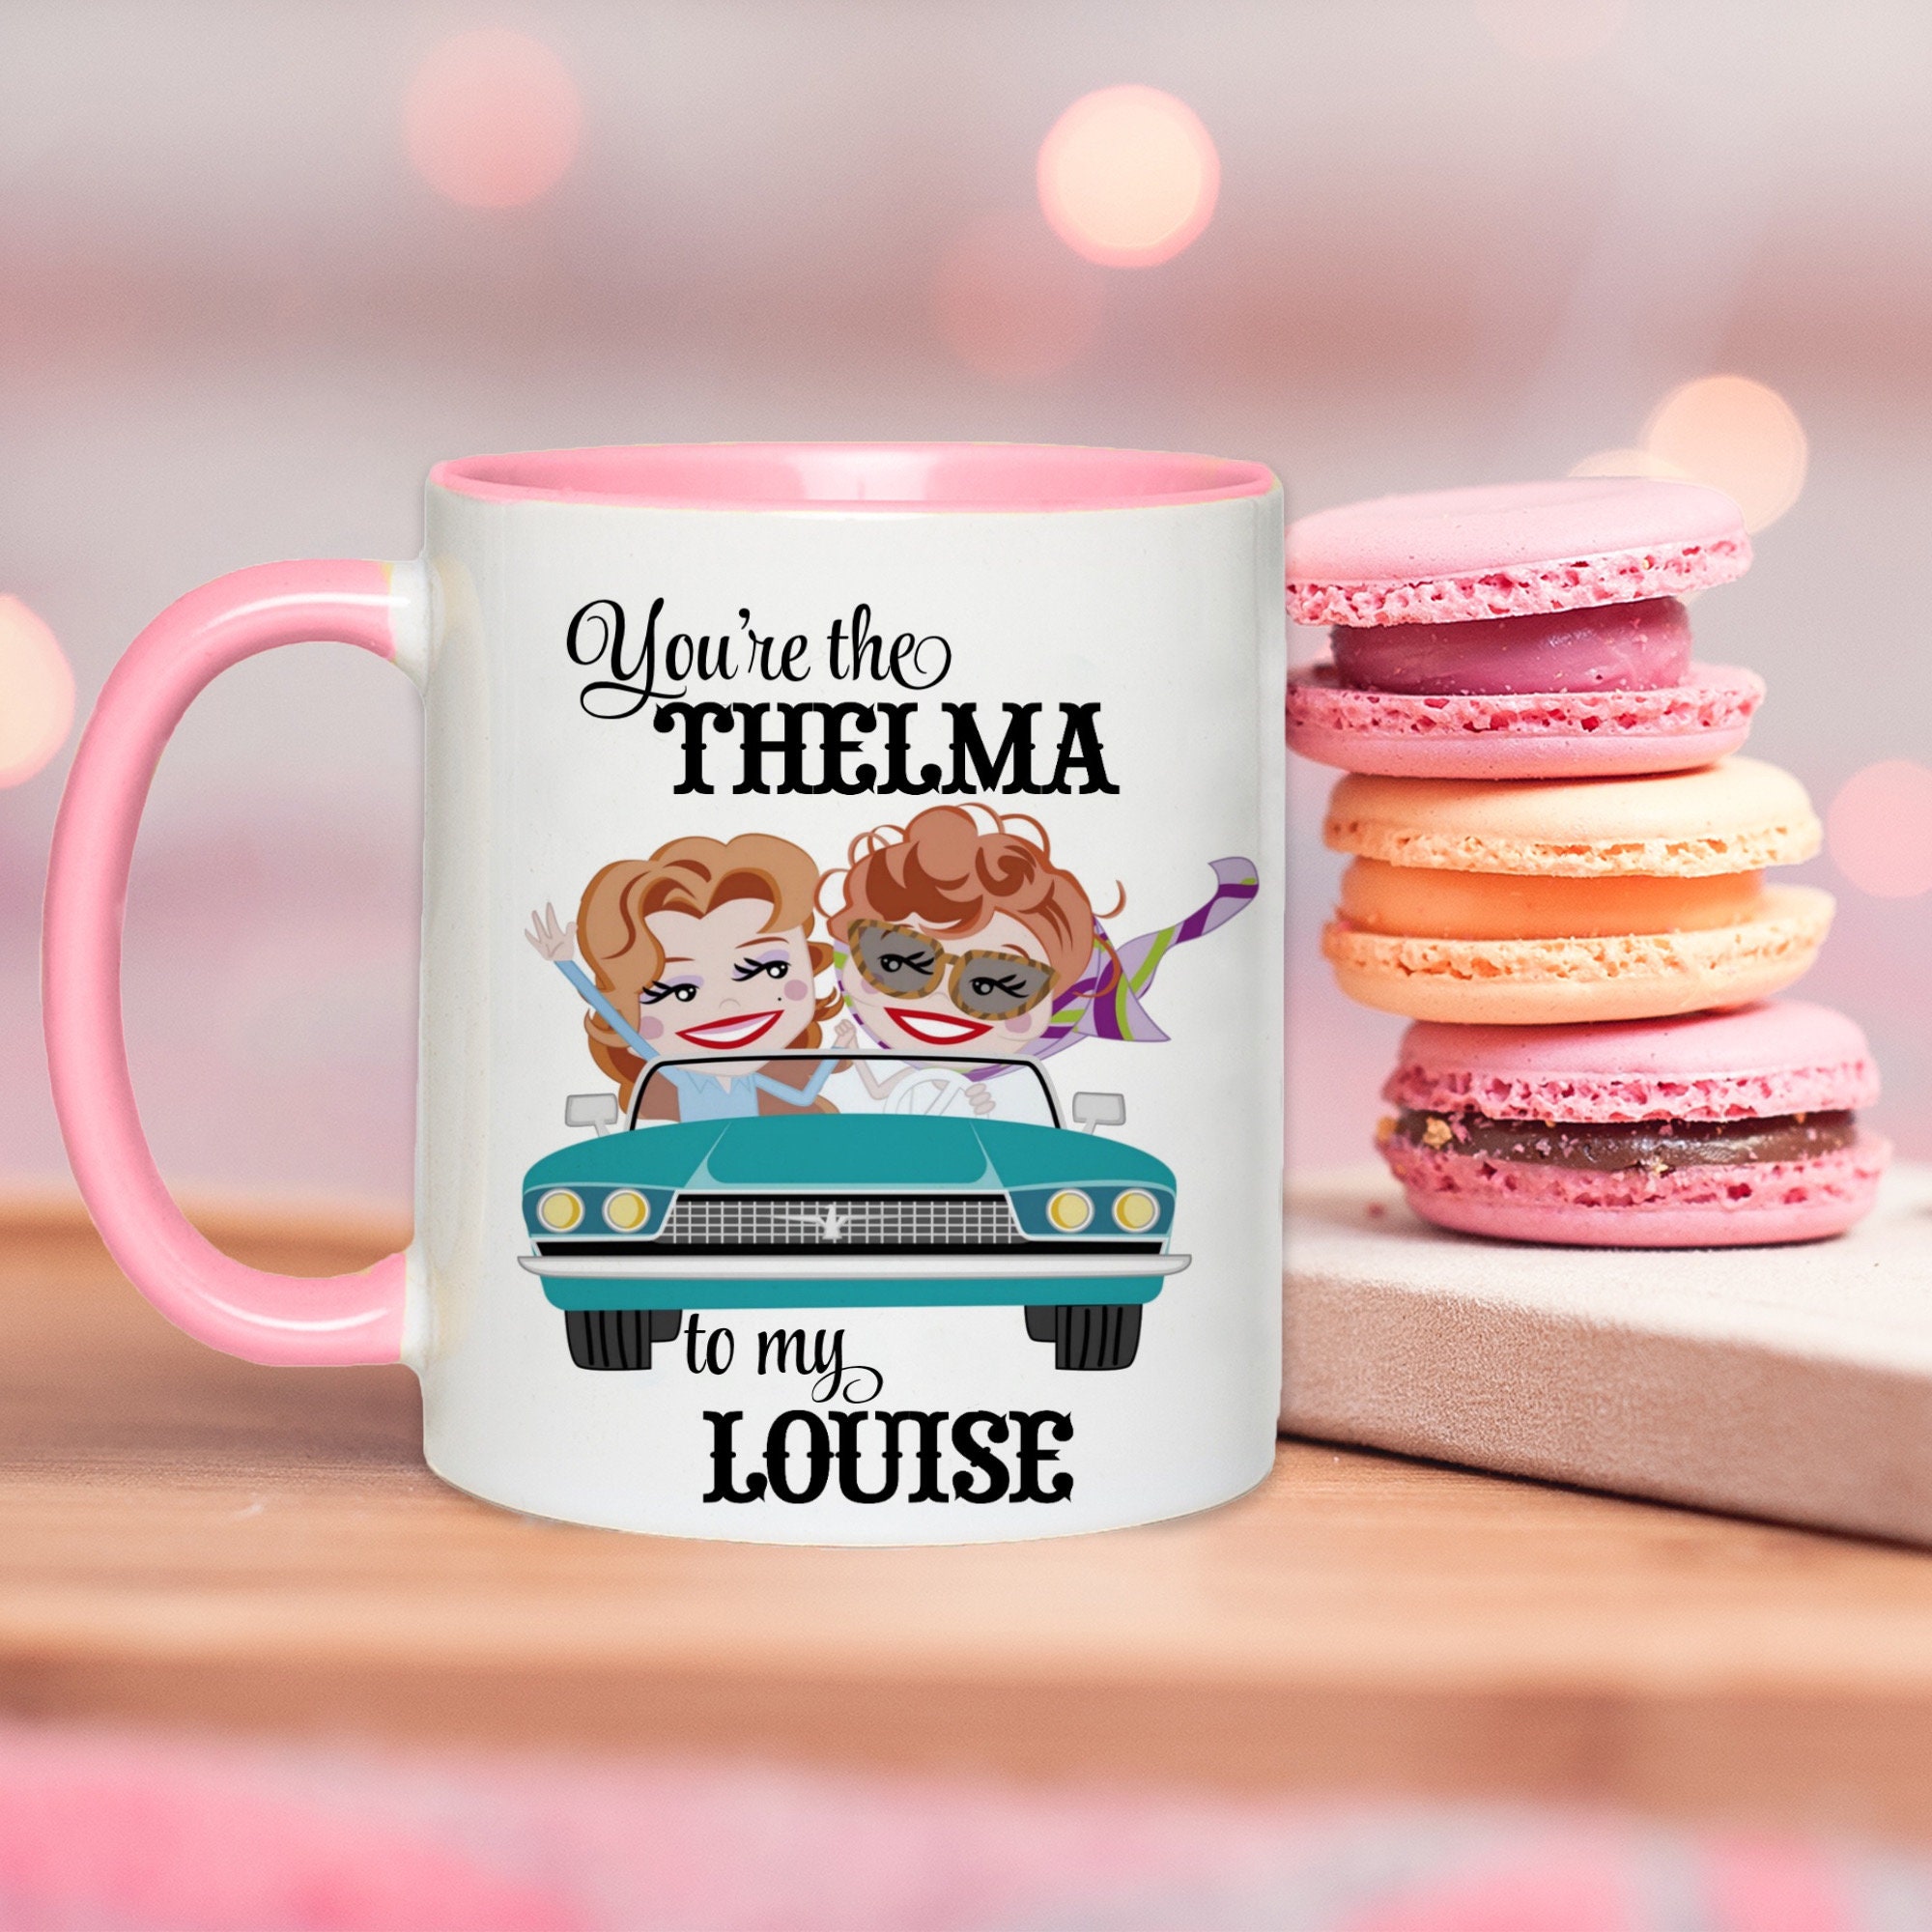 Bracelet You're The Louise/Thelma to My Thelma/Louise